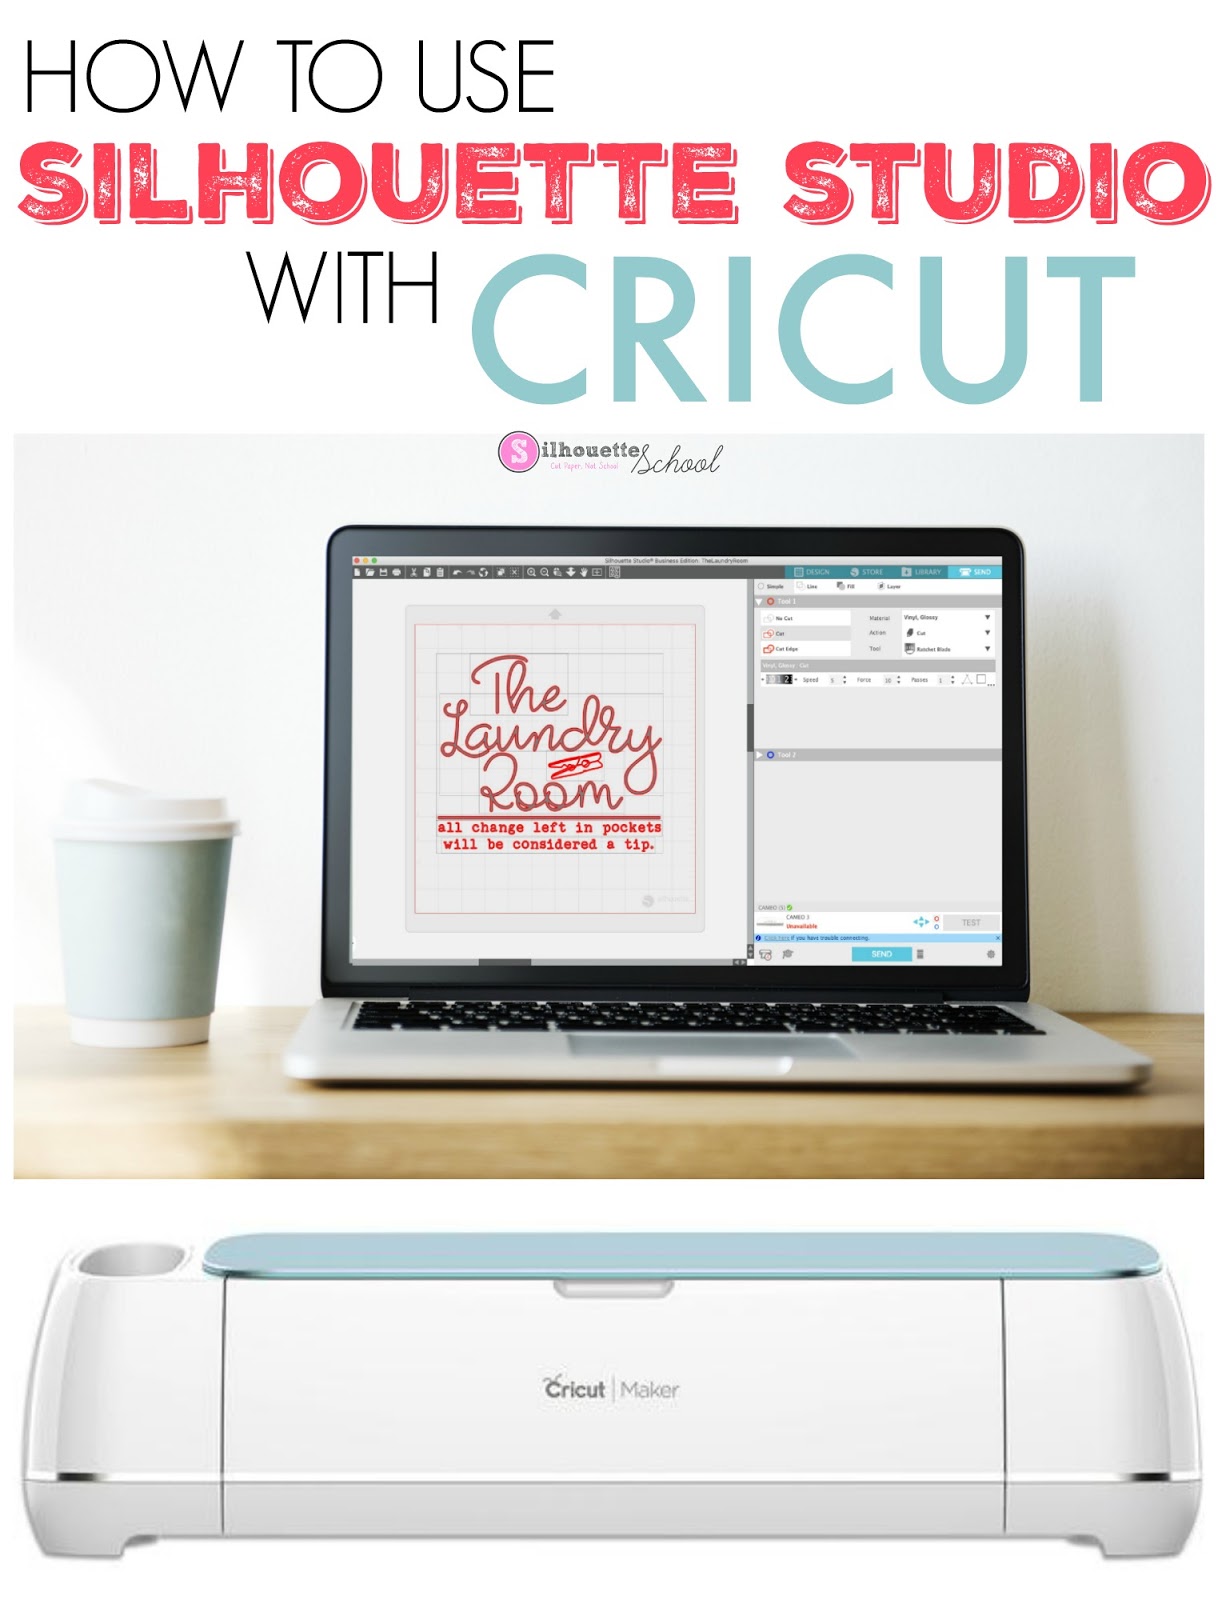 install cricut design space from different hard drive